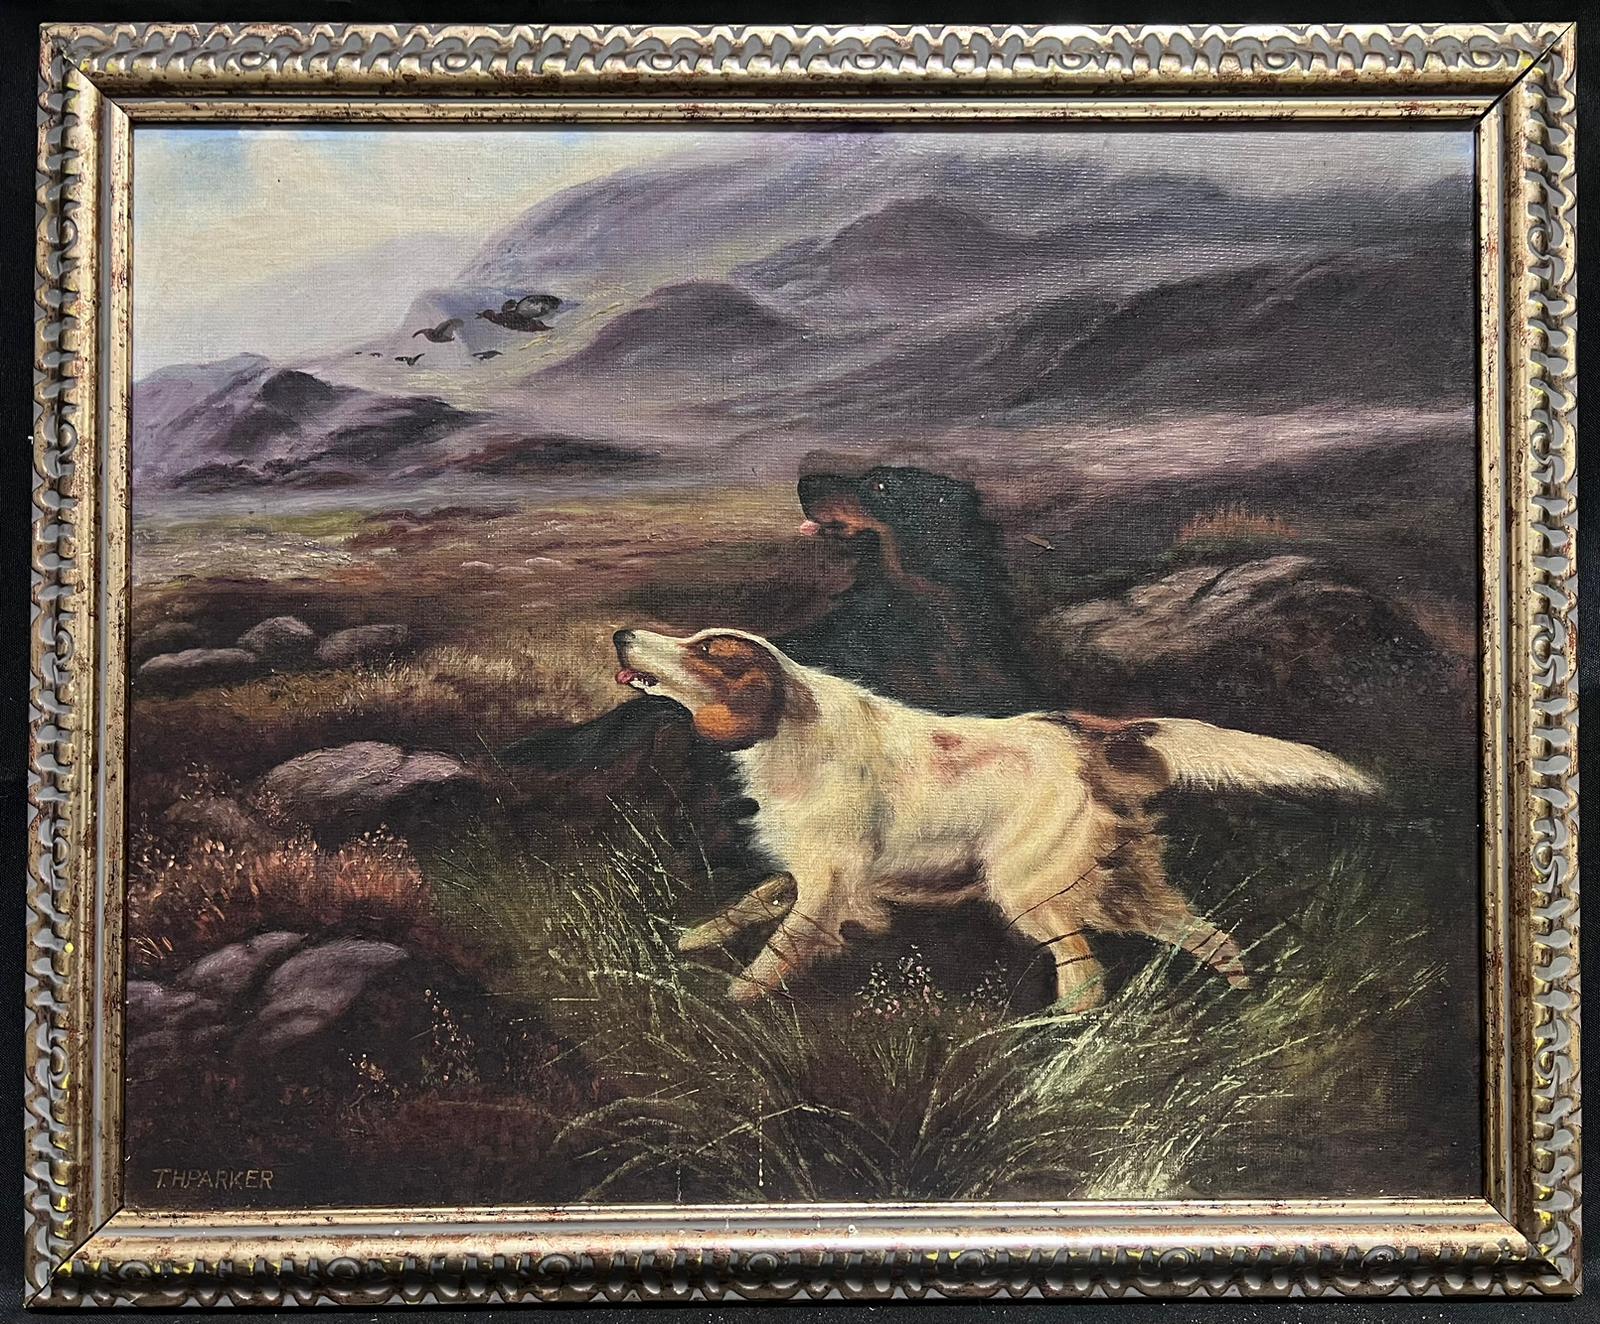 Hunting in Scotland
by T.H.Parker, British 20th century
signed oil on board, framed
framed: 19 x 23 inches
board: 16 x 20 inches
provenance: private collection, UK
condition: very good and sound condition 